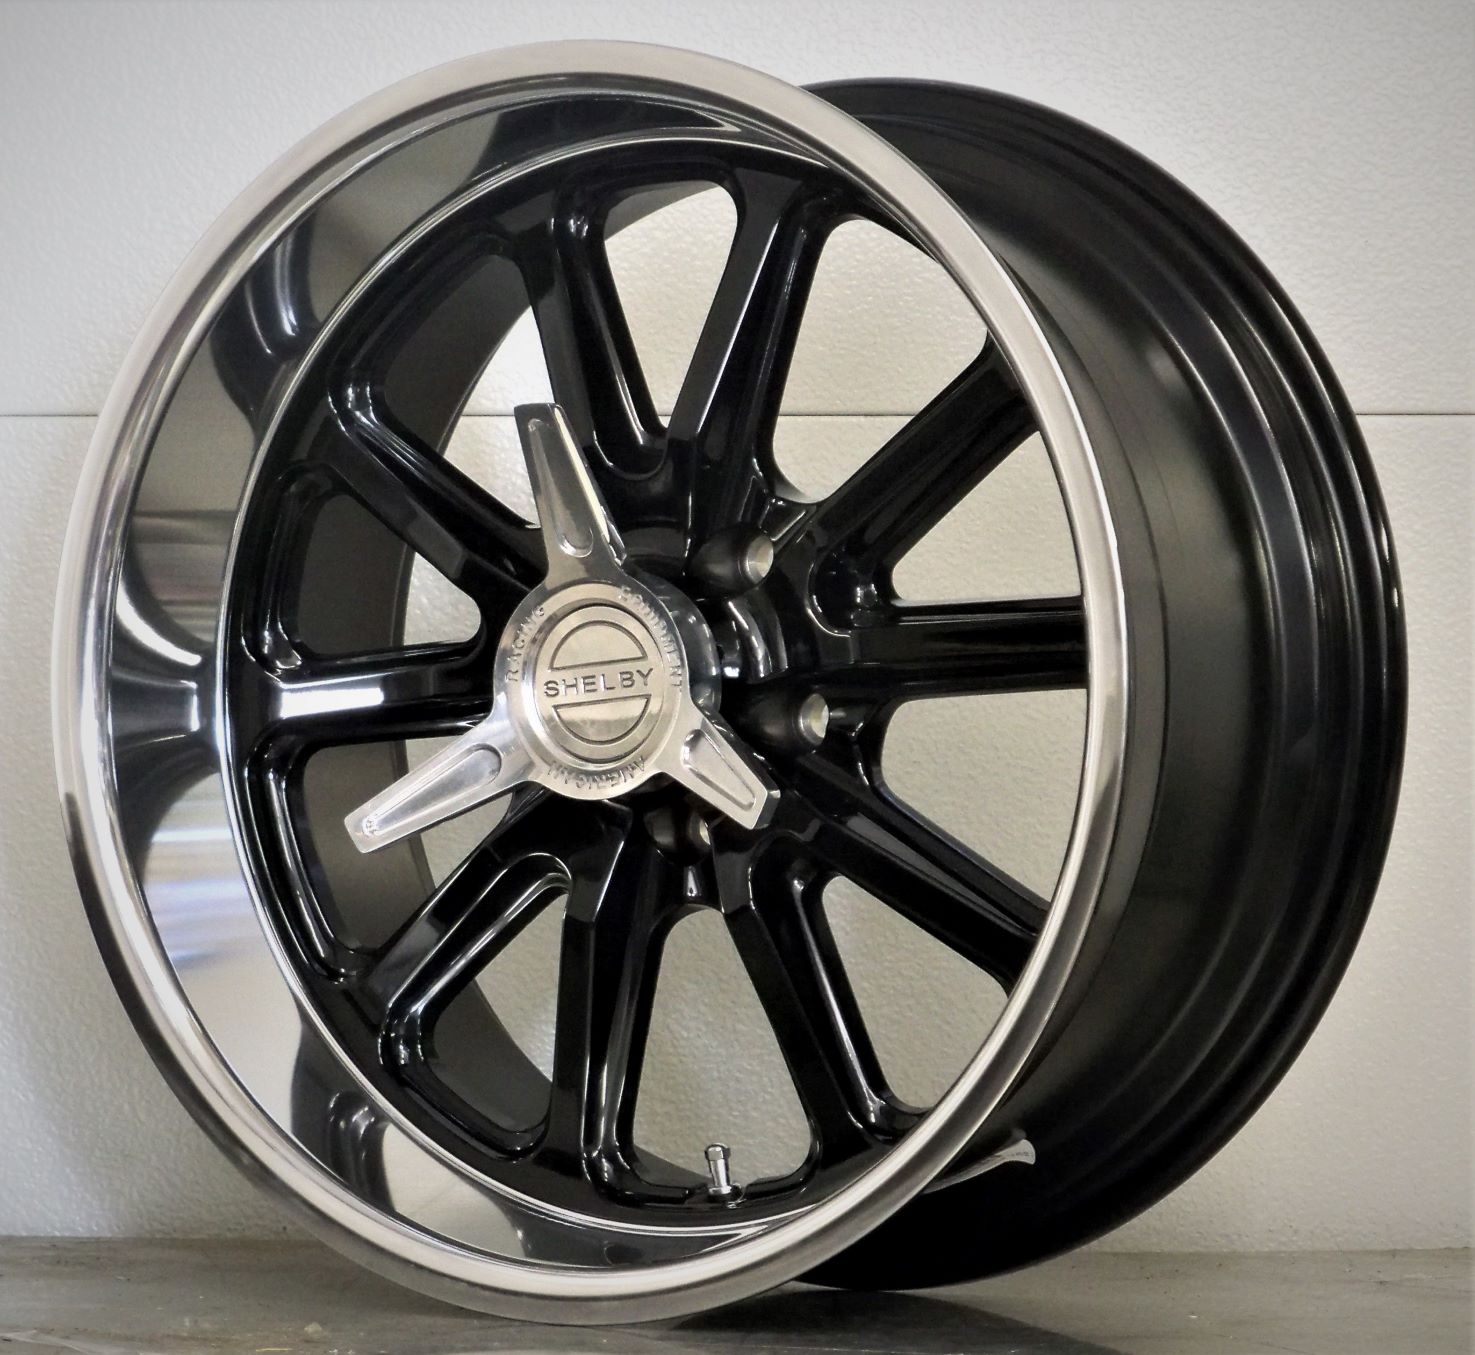 17s set of 4 RSB US Mags Shelby spinners gloss black 65-73